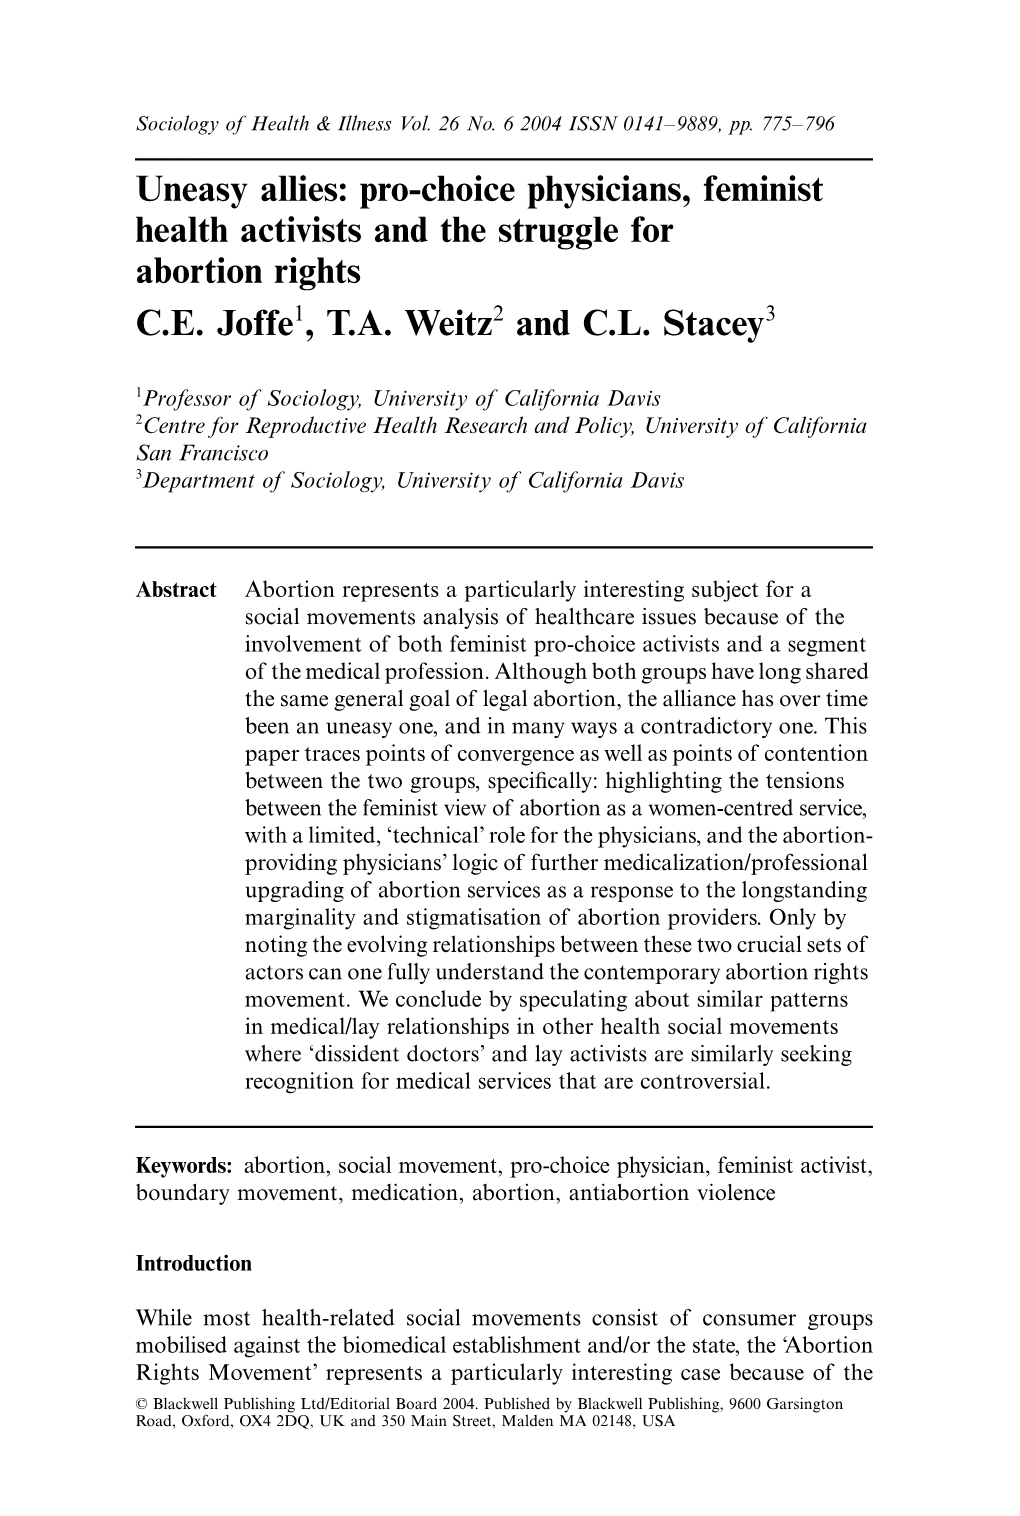 Uneasy Allies: Pro-Choice Physicians, Feminist Health Activists and the Struggle for Abortion Rights C.E